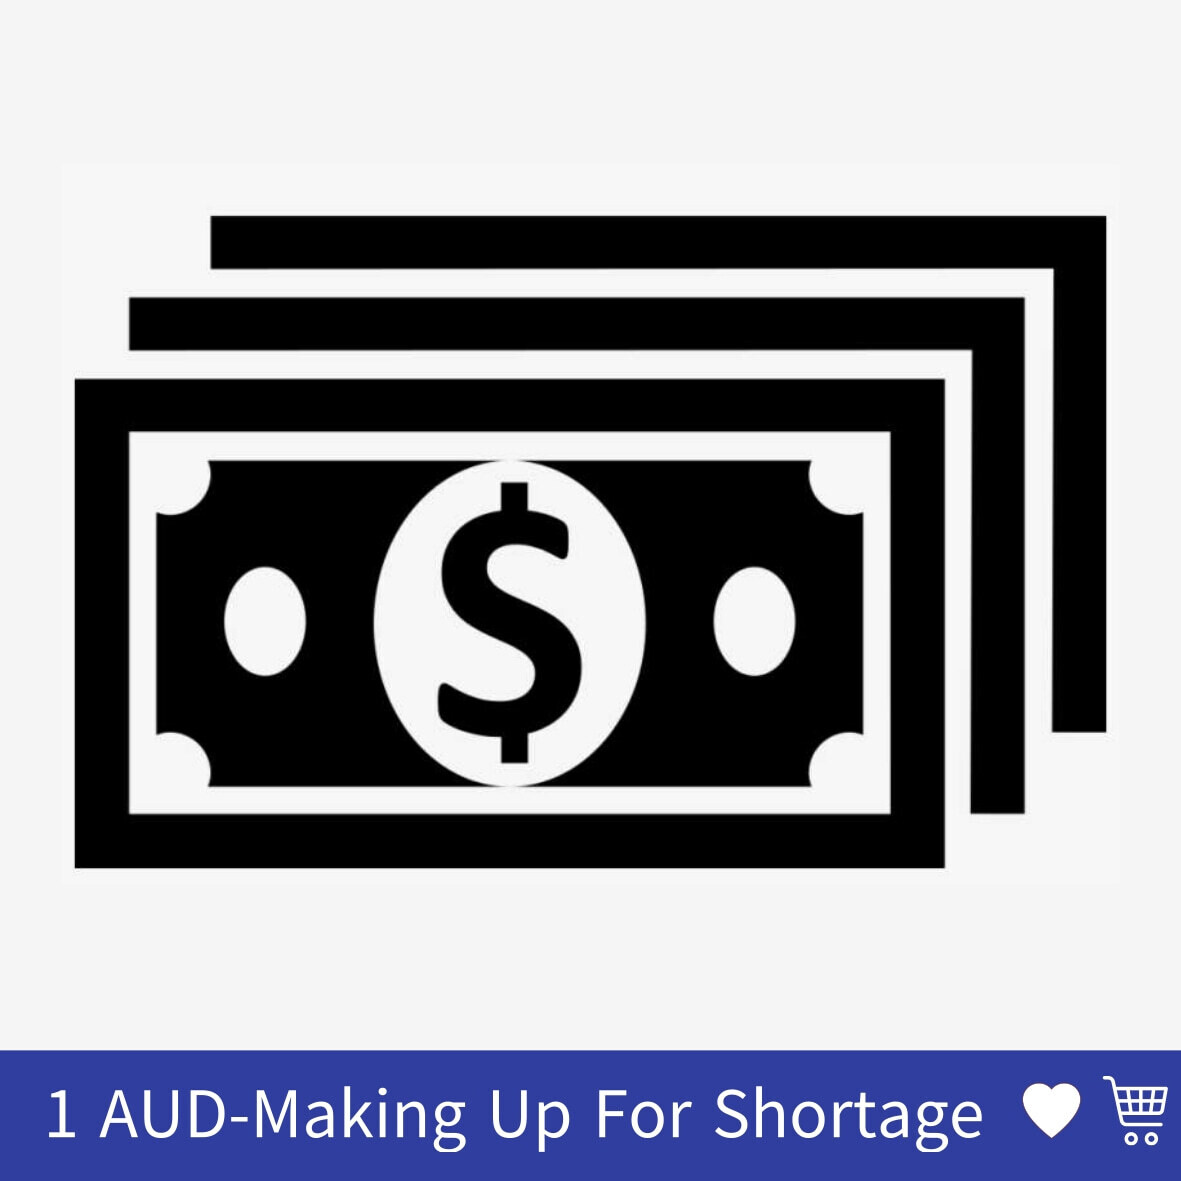 1 AUD-Making Up For Shortage